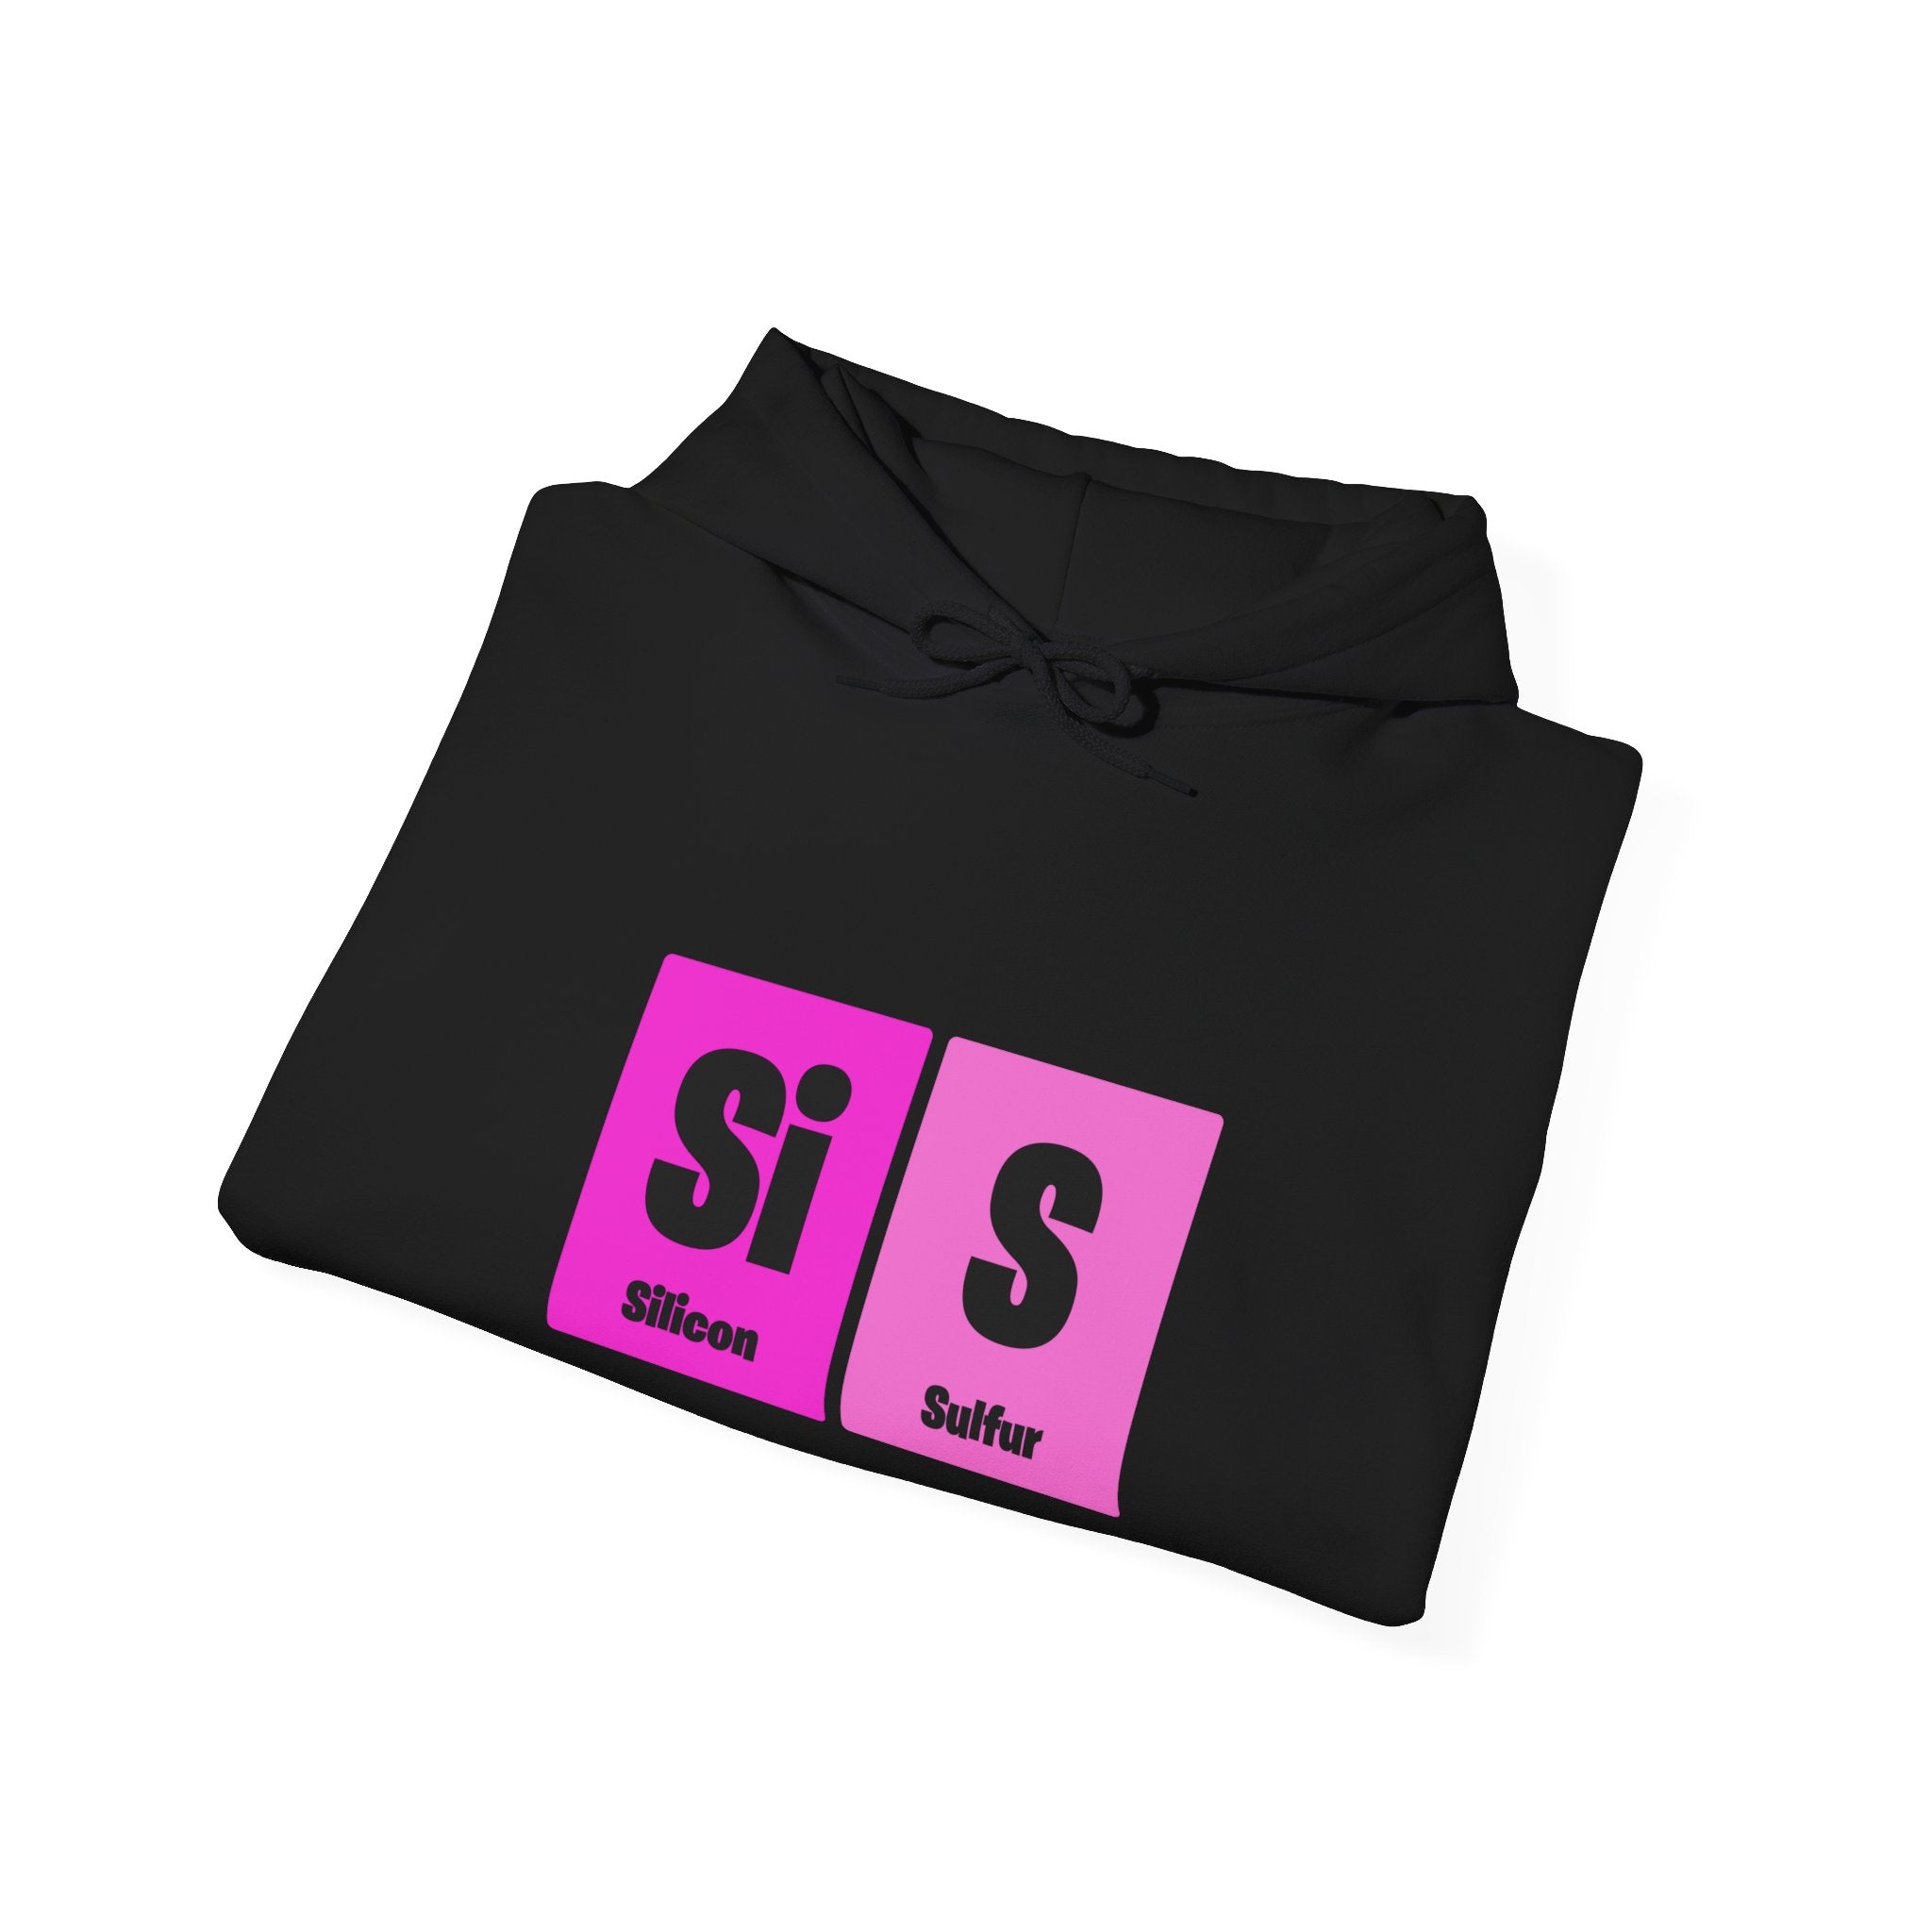 Stylish black Si-S Light Pendant - Hooded Sweatshirt featuring periodic table elements Silicon (Si) and Sulfur (S) highlighted in pink.